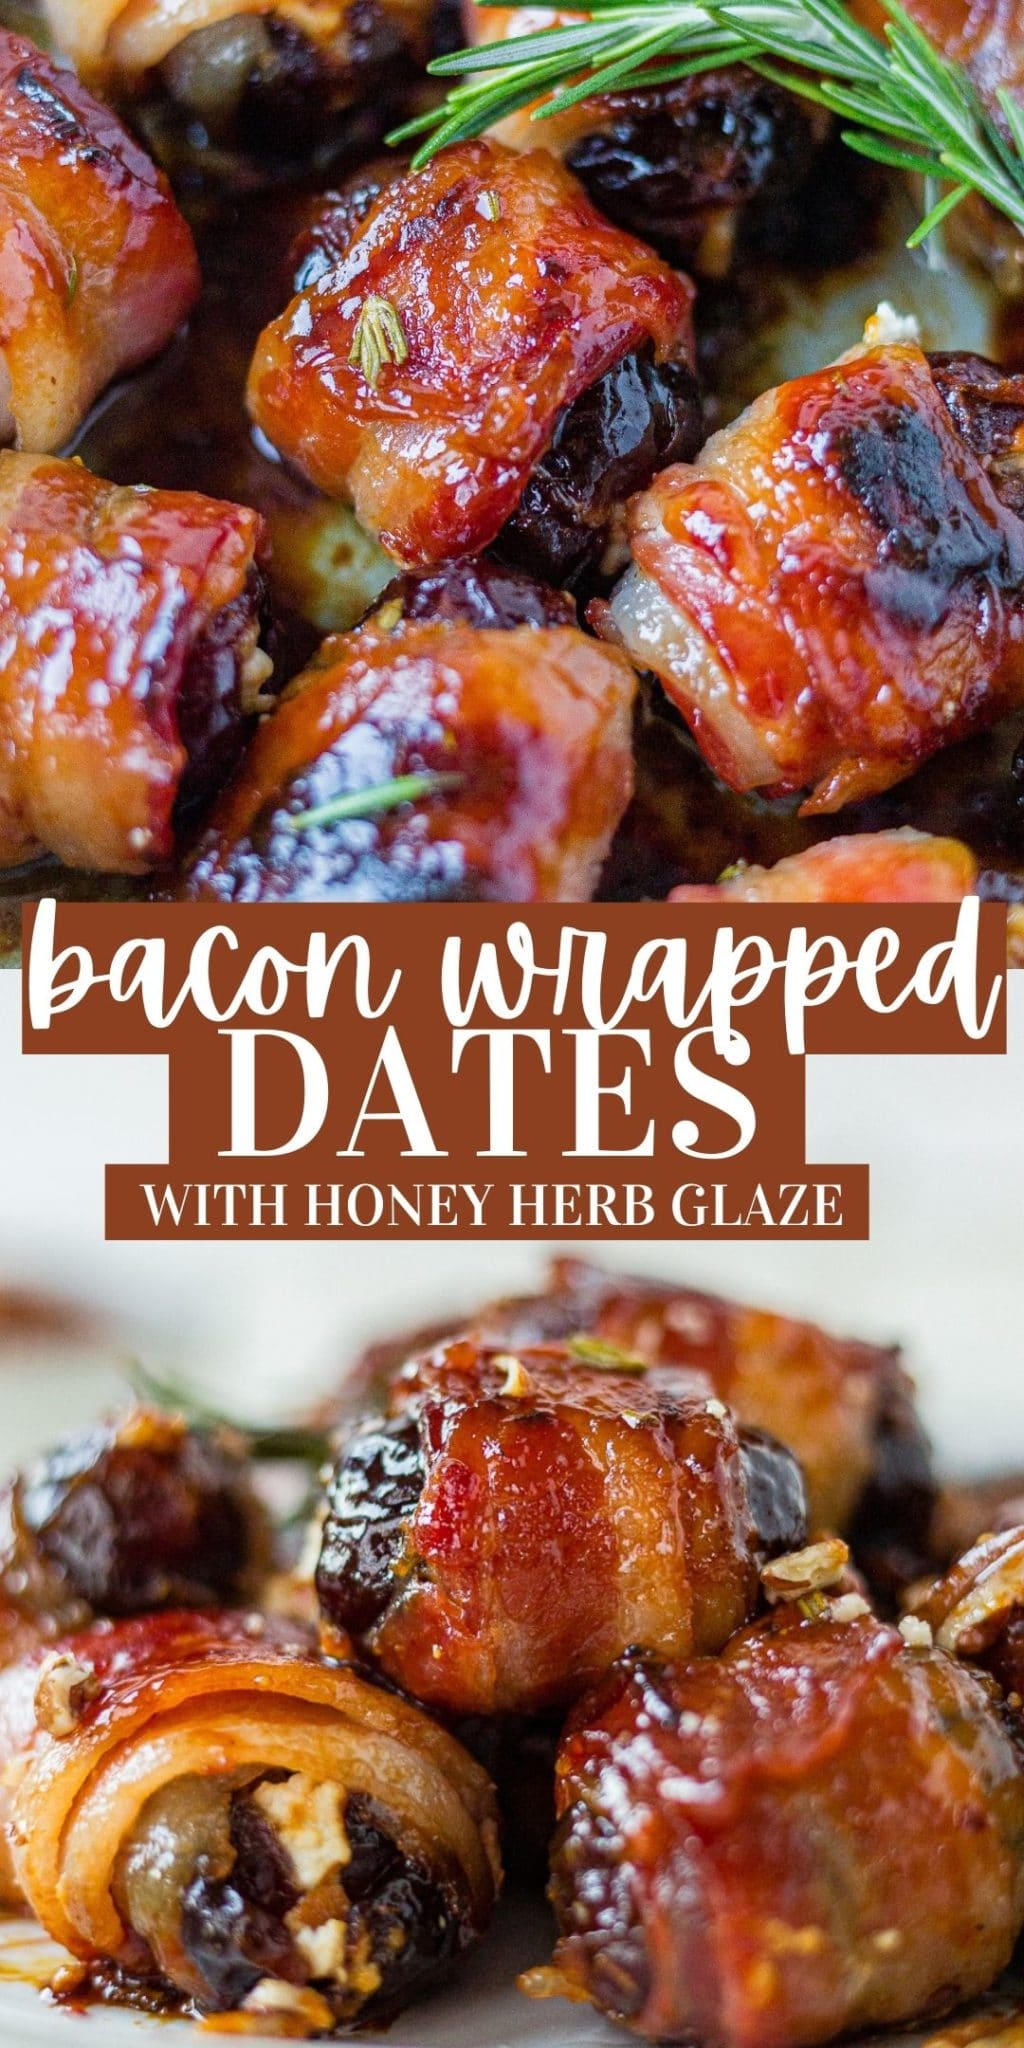 bacon wrapped dates image collage